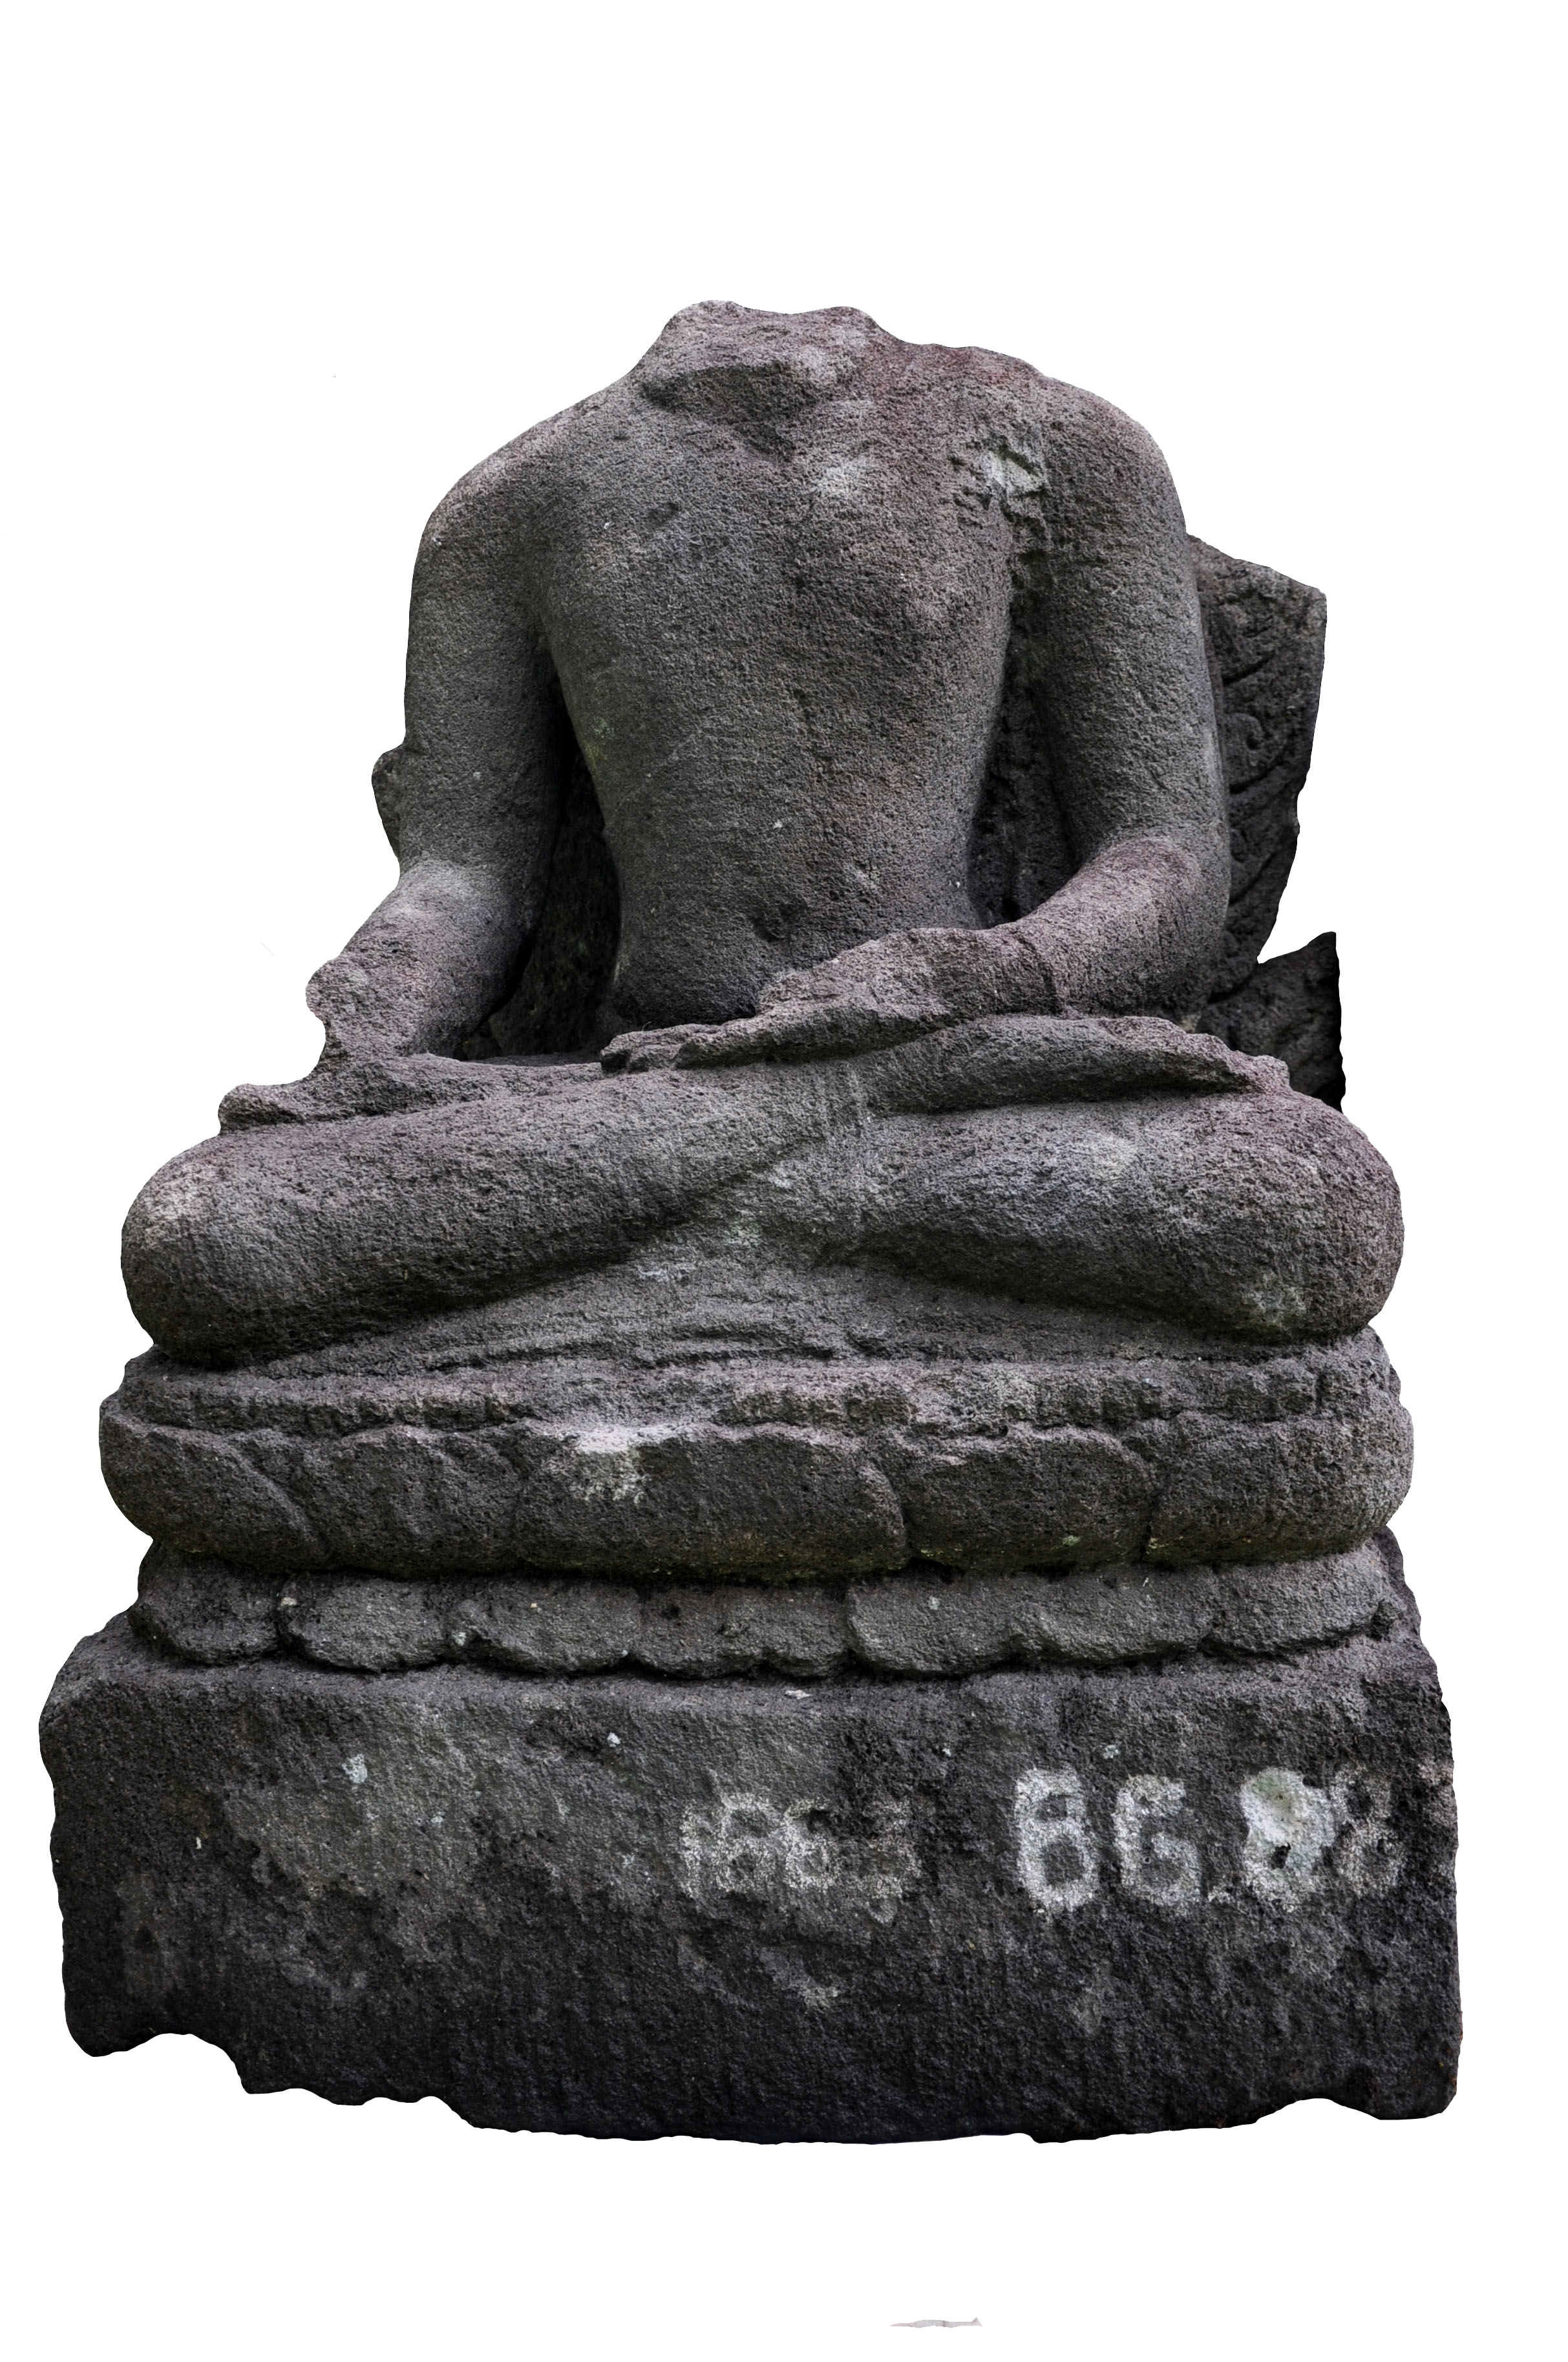 Read more about the article Arca Dyani Buddha